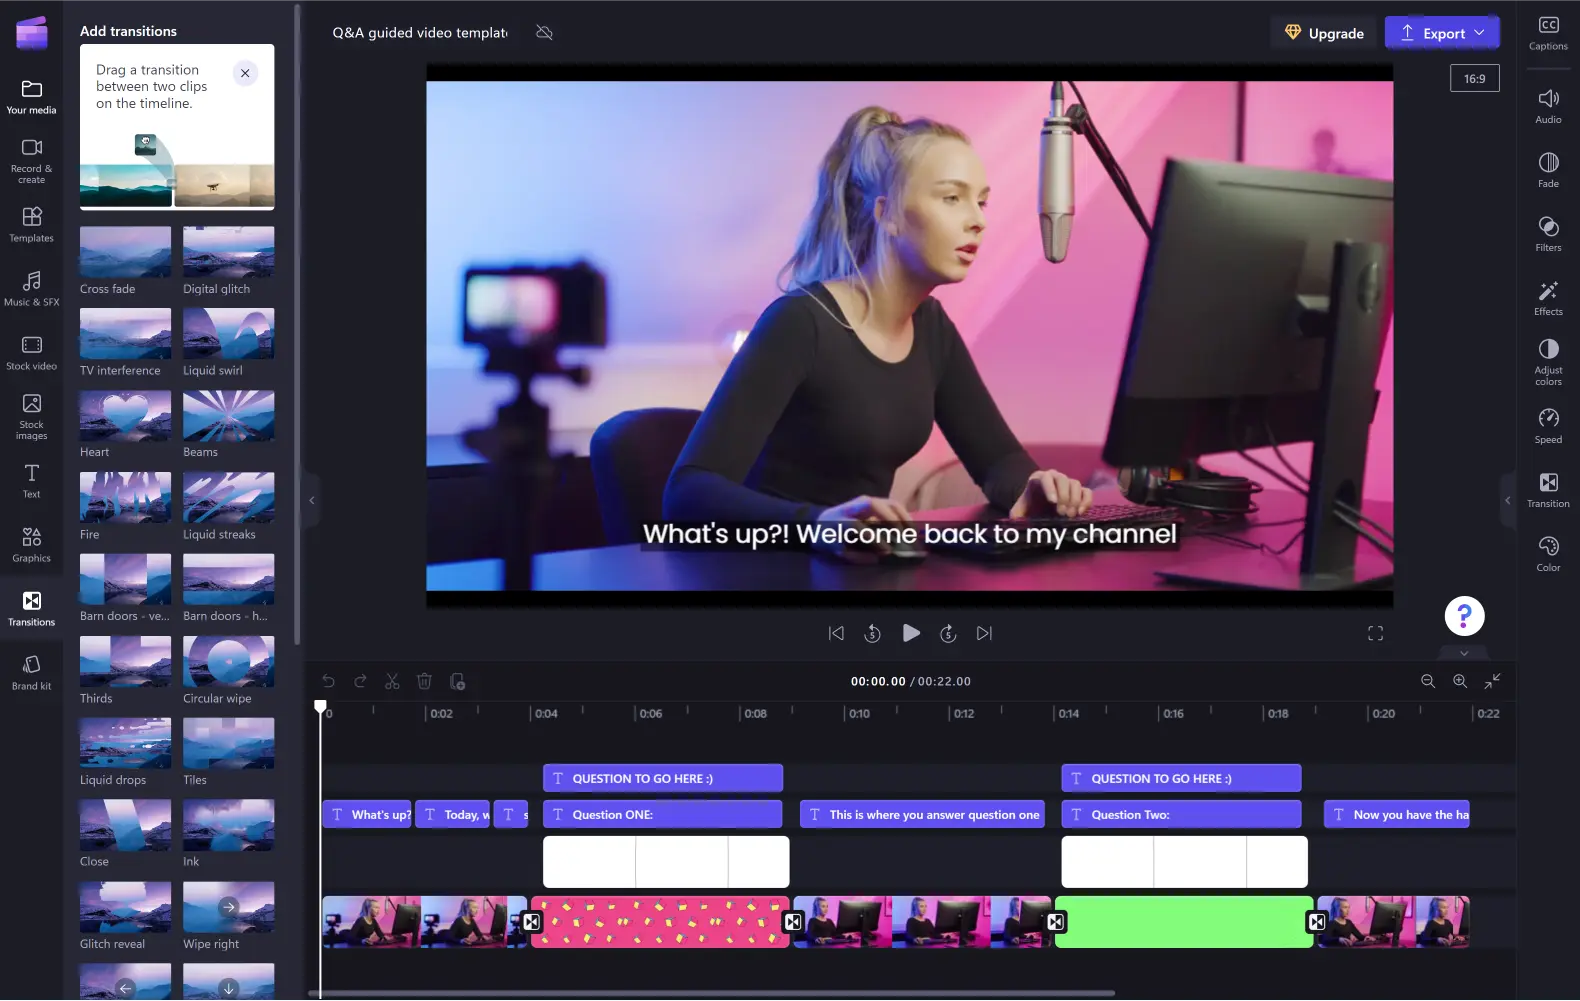 A visual showing the video editing experience in Clipchamp, focusing on voice customization.